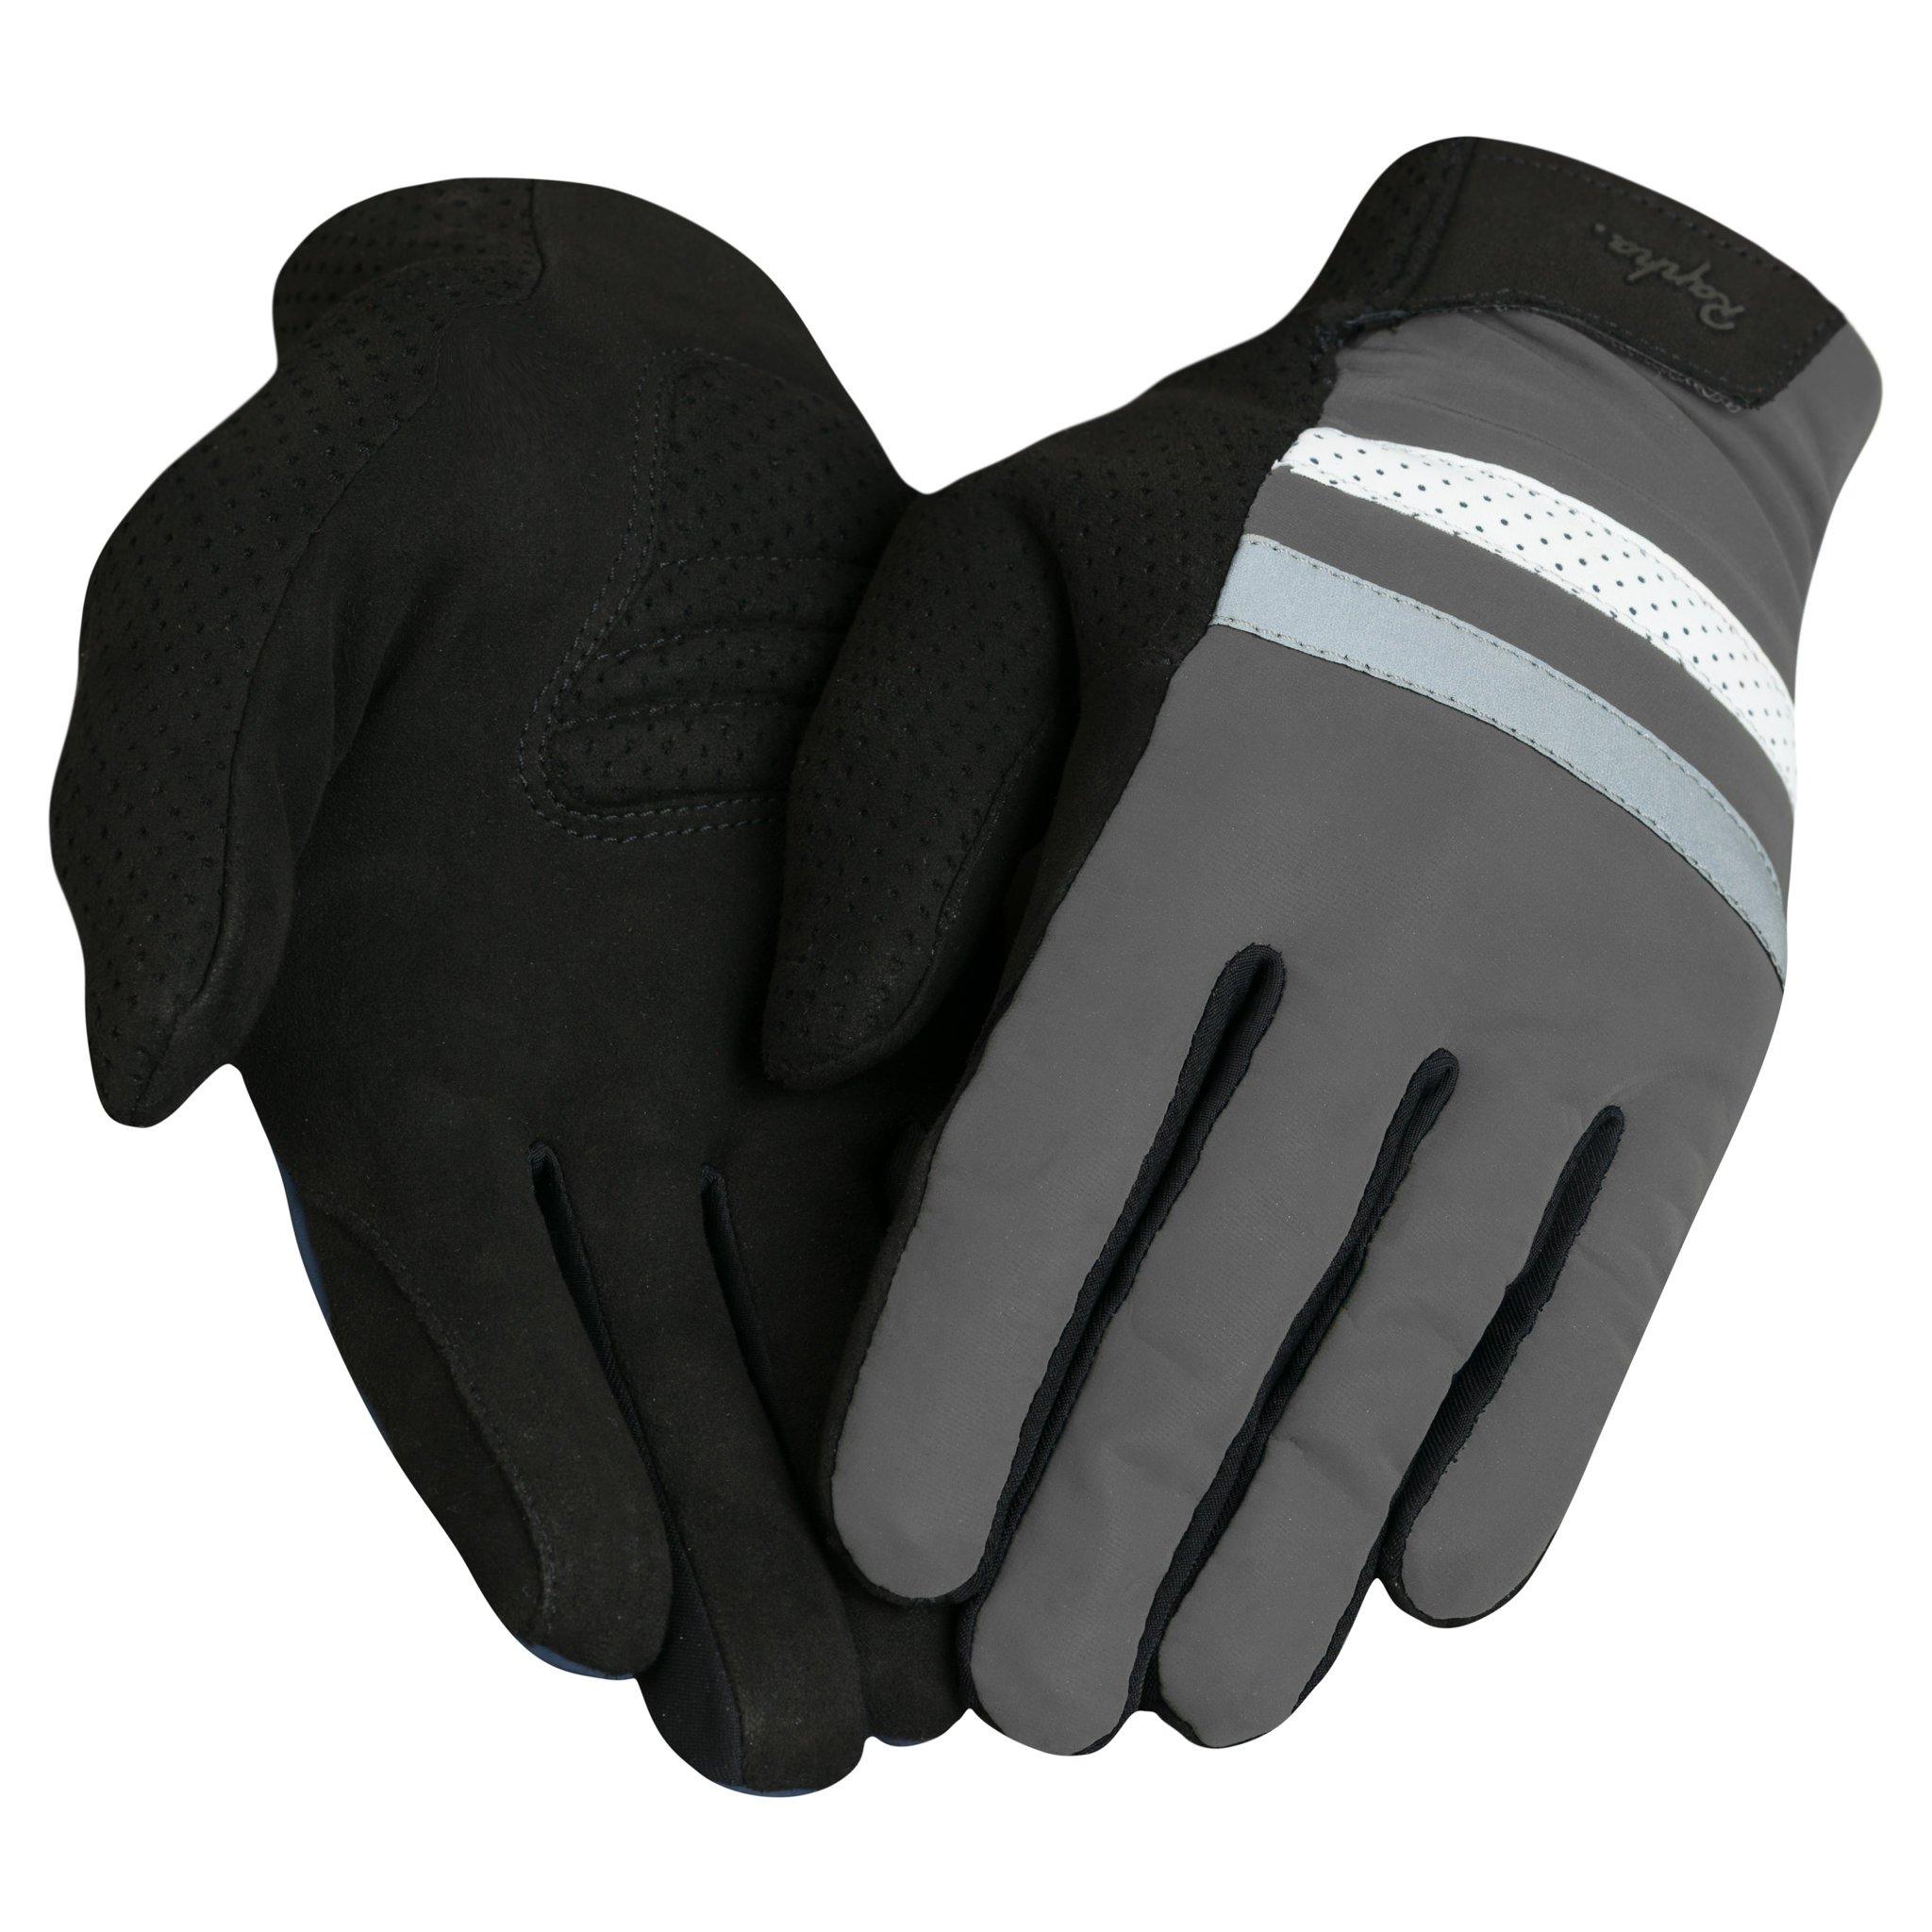 Brevet Reflective Gloves | Men\'s Winter | for Rapha Cycling Commuting and Gloves Reflective Riding